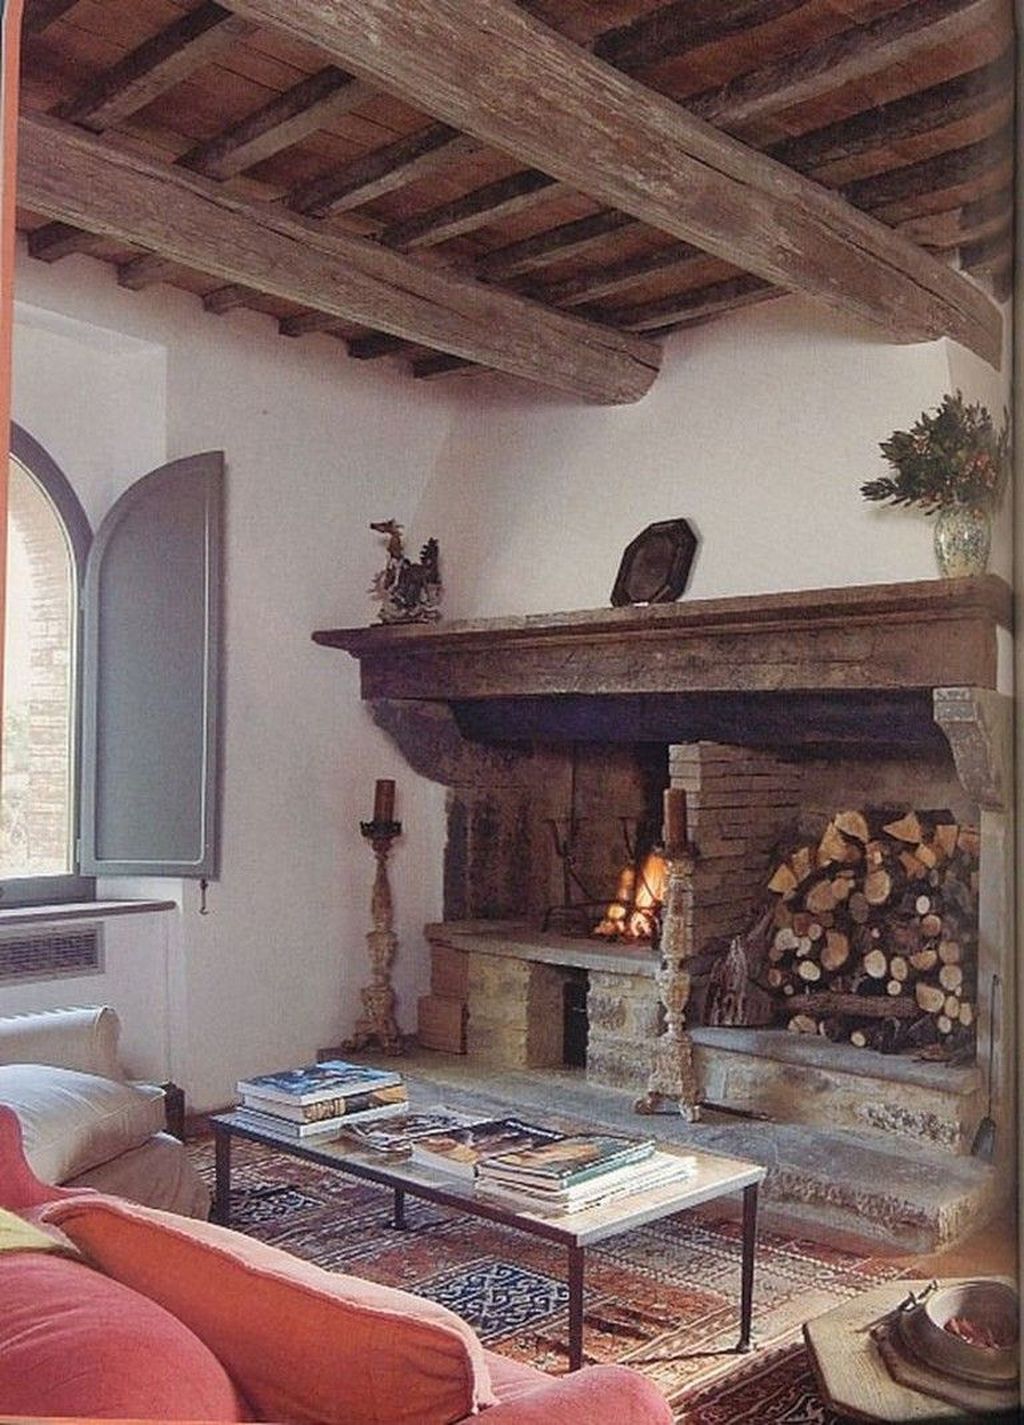 32 Stunning Italian Rustic Decor Ideas For Your Living Room - MAGZHOUSE